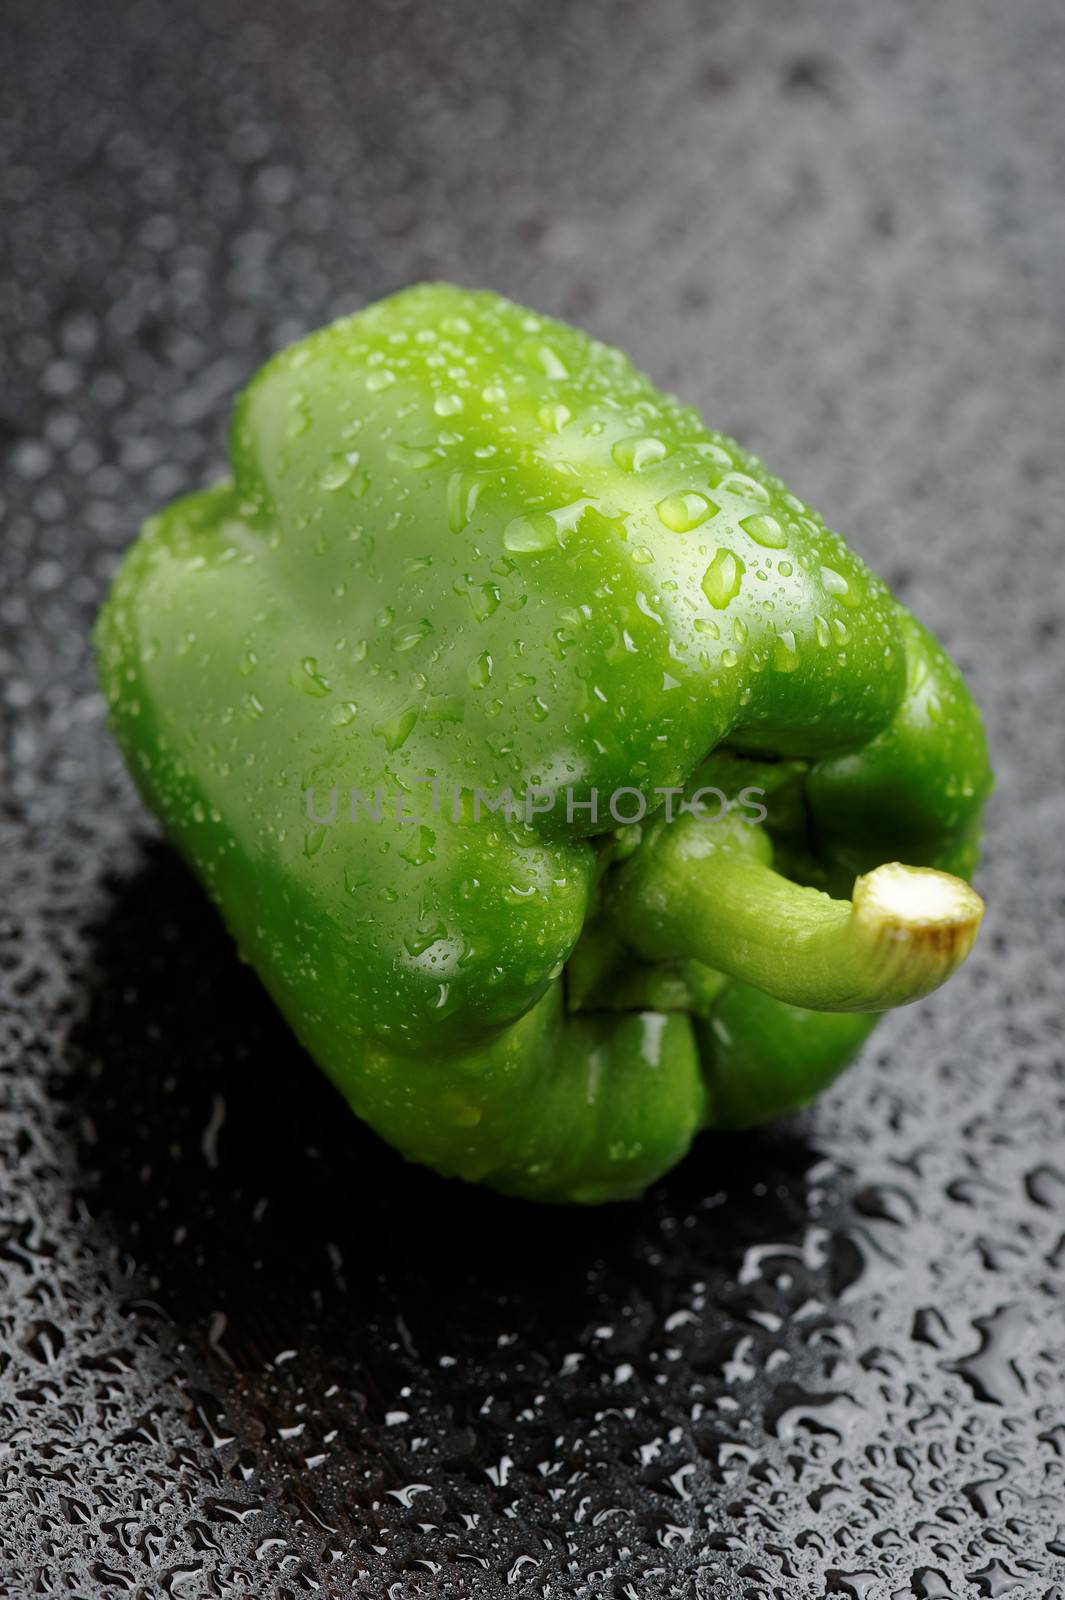 Green bell pepper on black table after rain